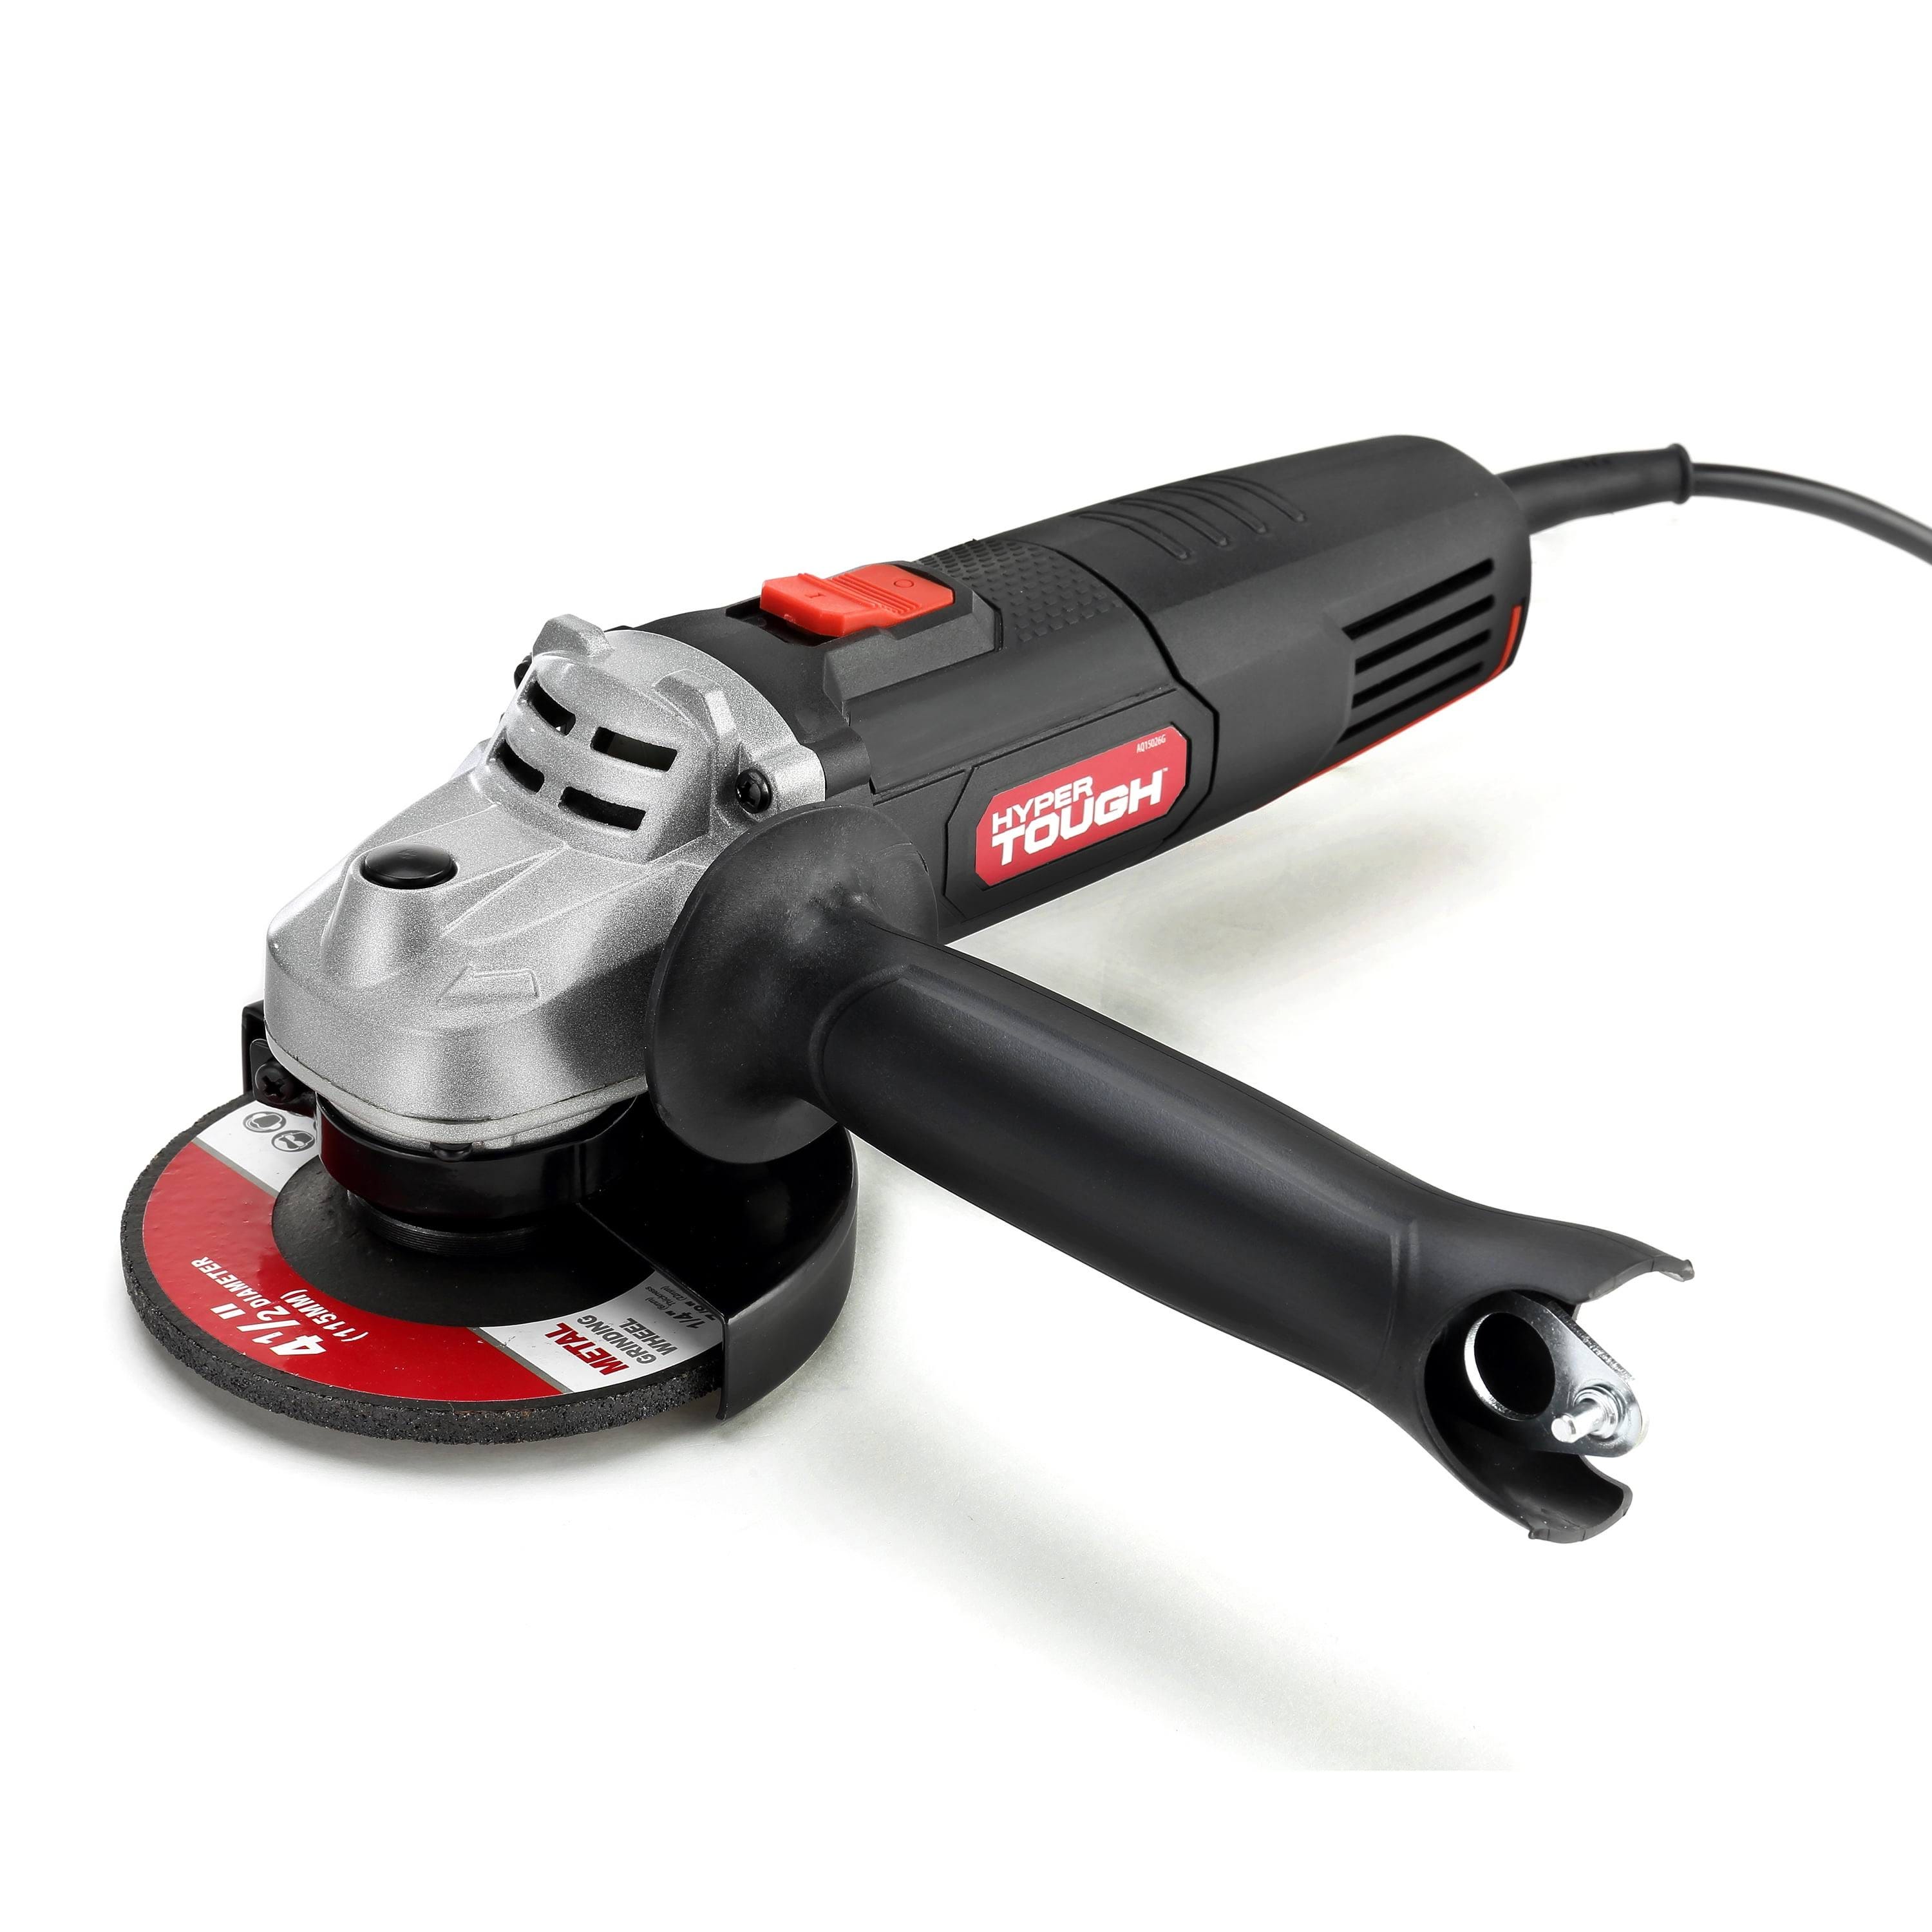 Hyper Tough 6 Amp Corded Angle Grinder for Durable Cutting and Grinding | Image